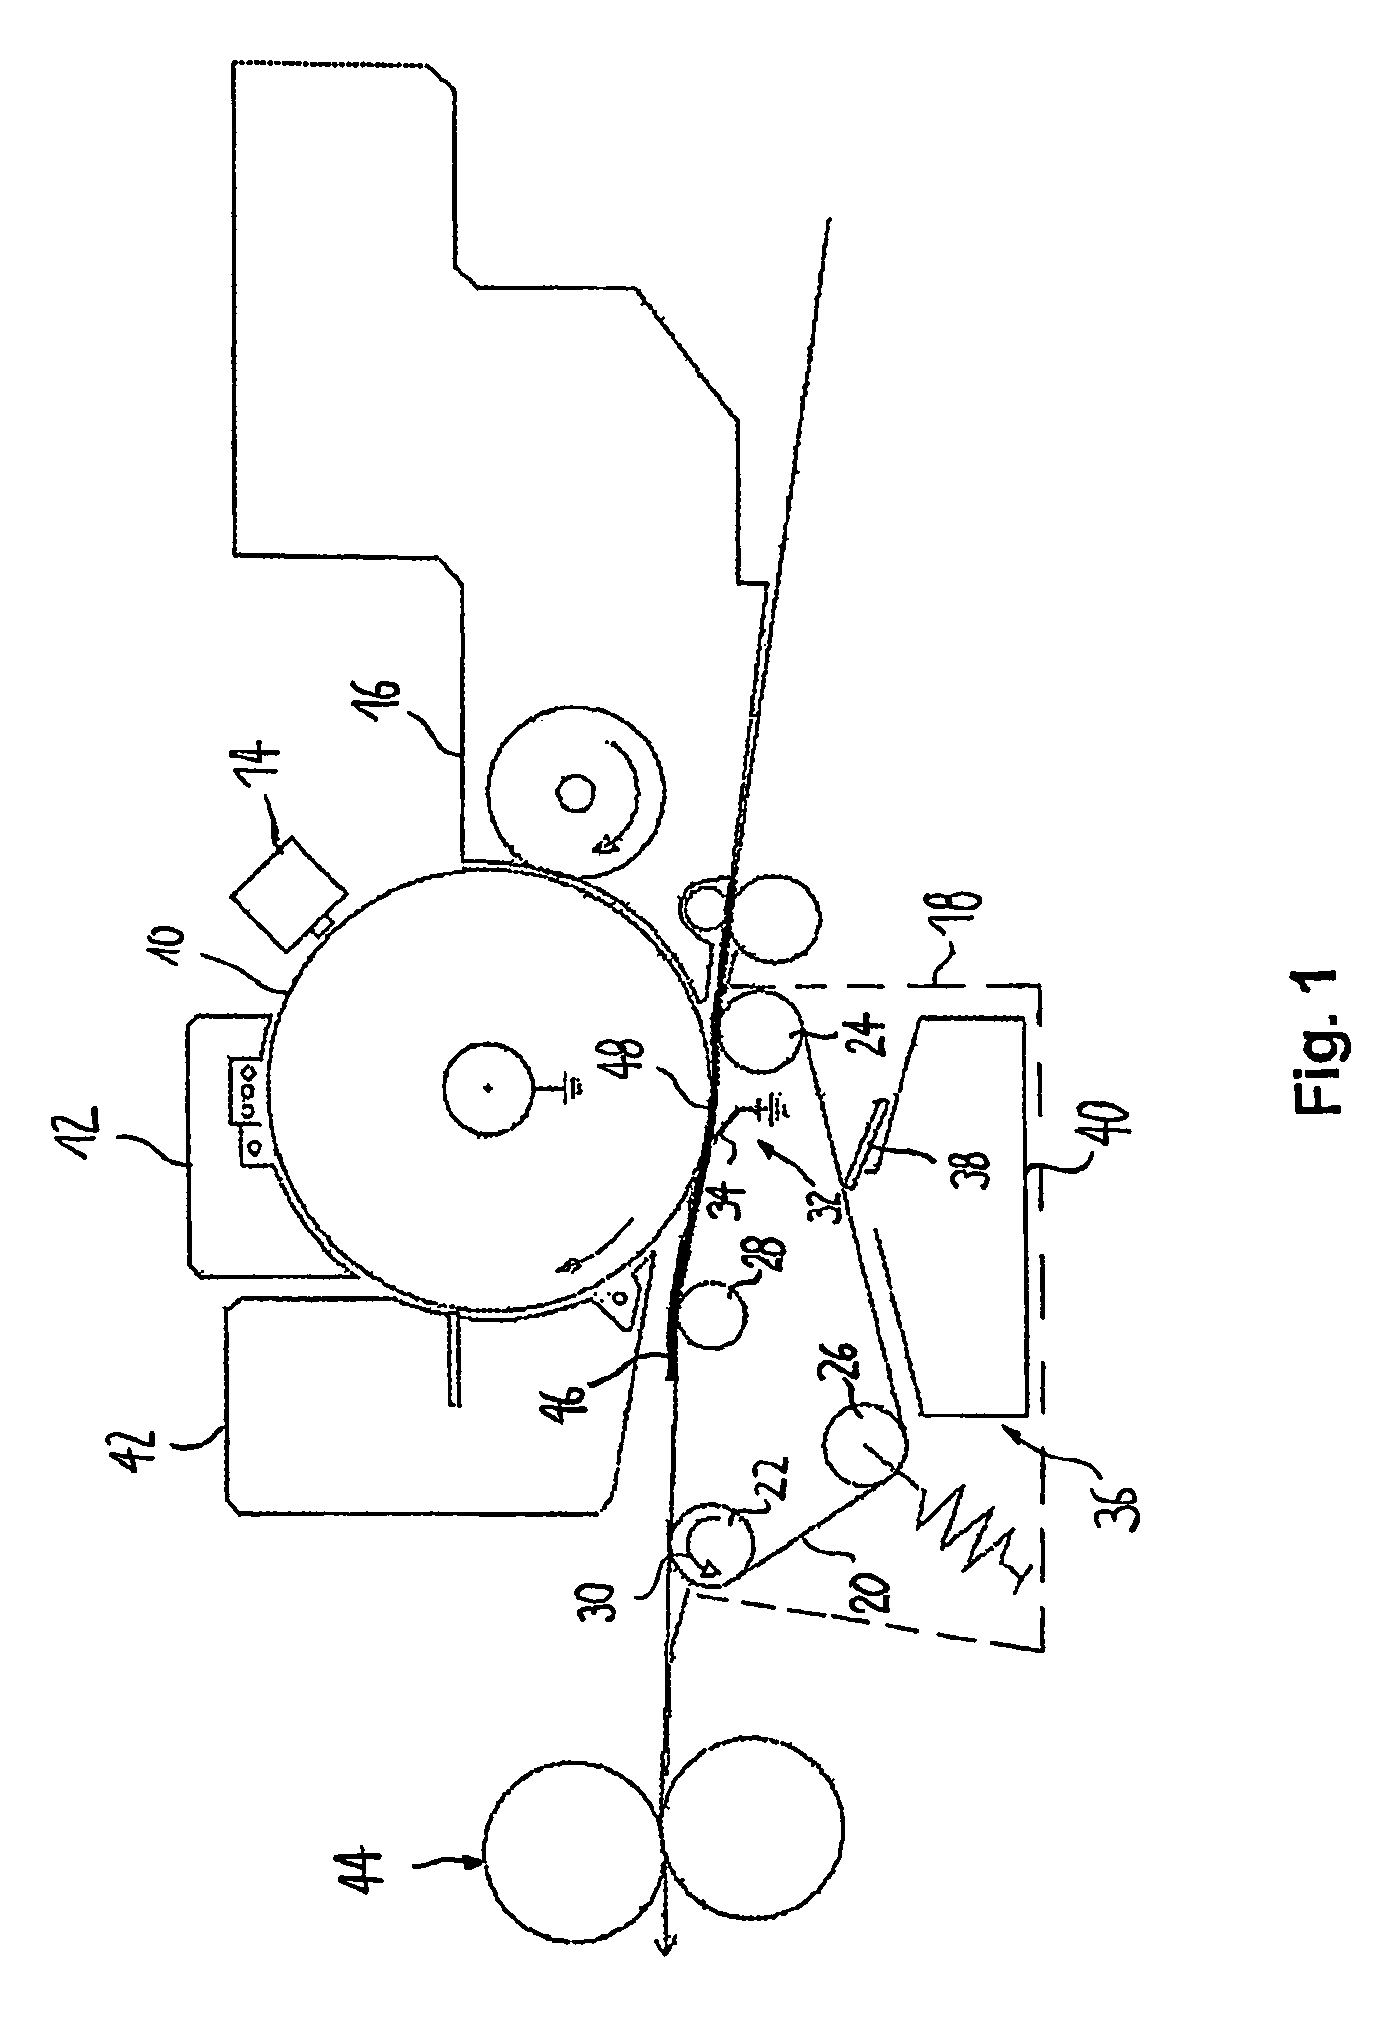 Device and method for charging a media transport belt conveyor in a printer or copier